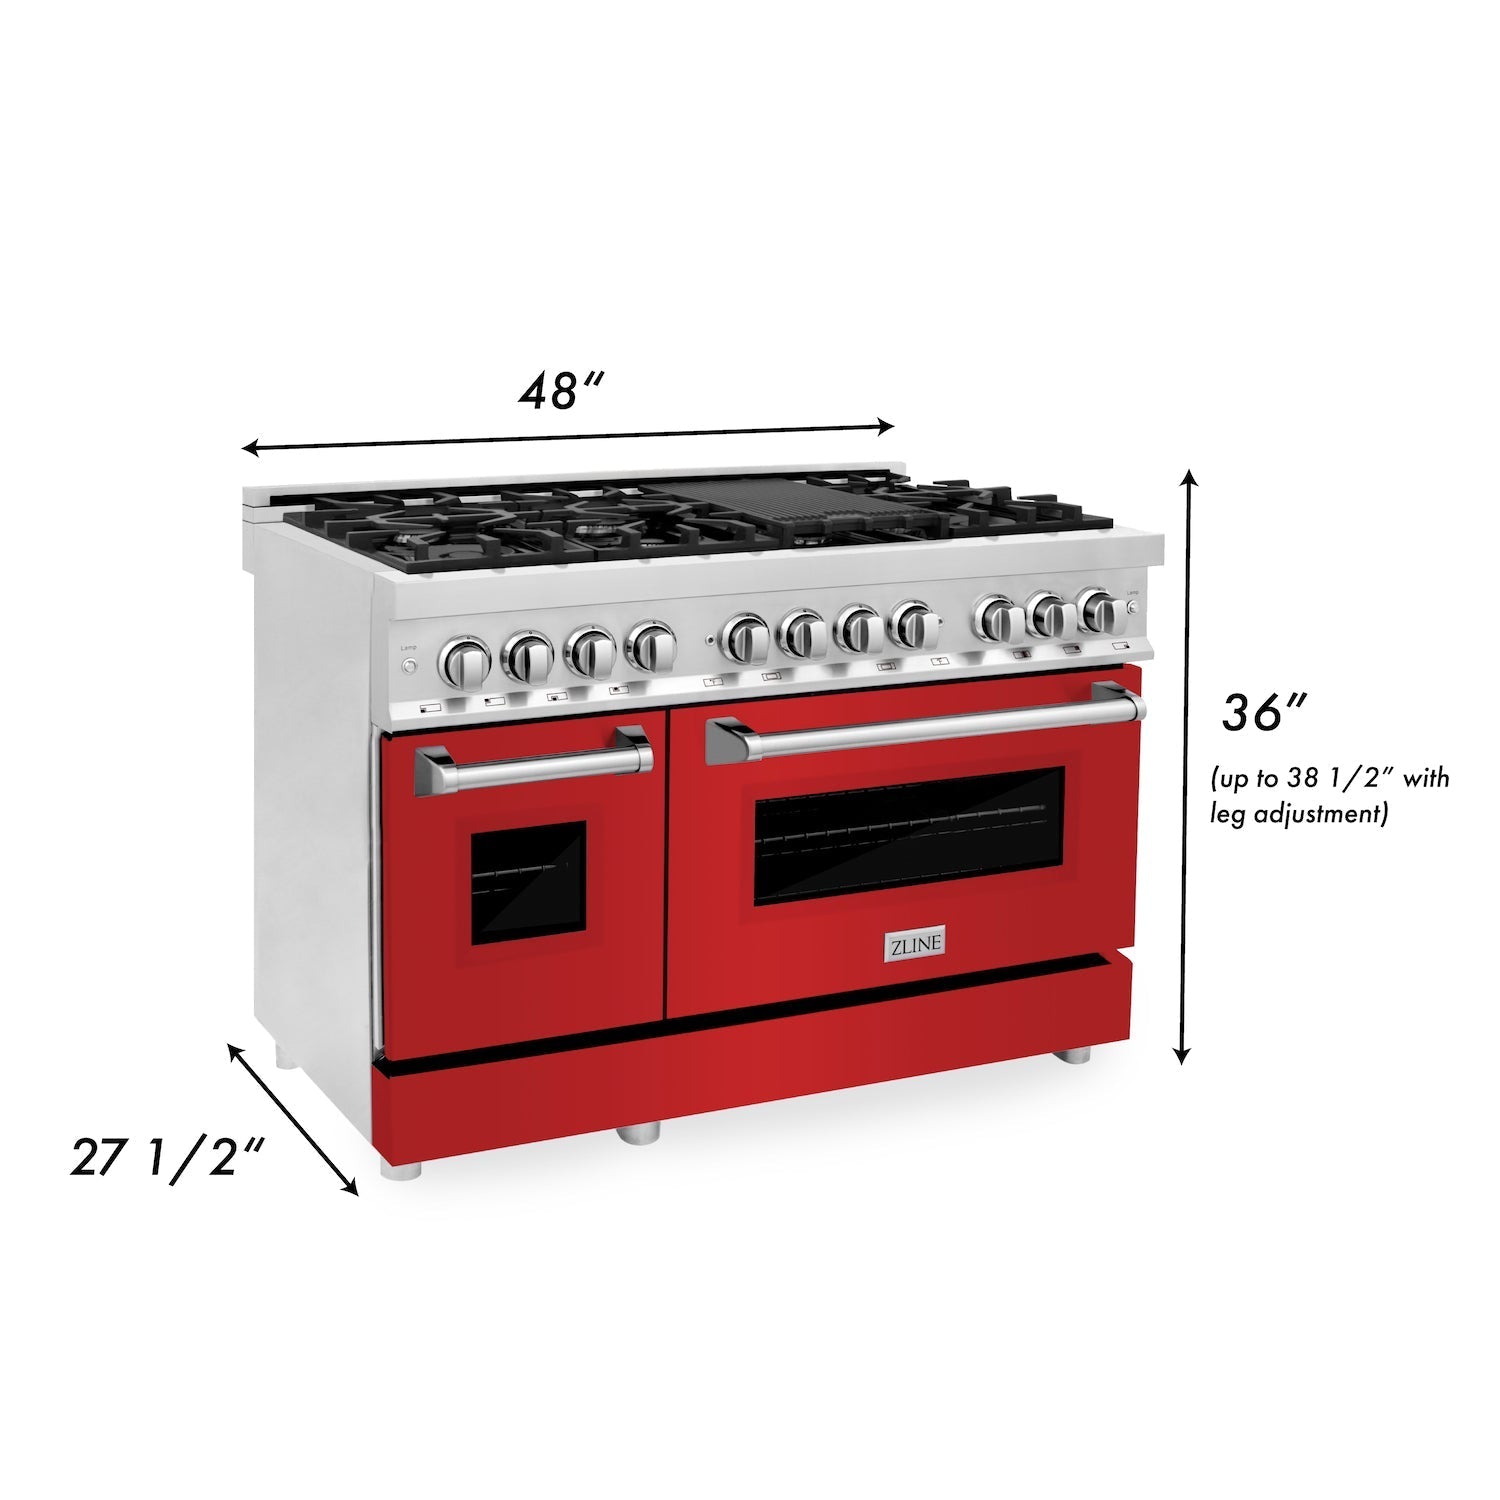 ZLINE 48" 6.0 cu. ft. Dual Fuel Range with Gas Stove and Electric Oven in Stainless Steel and Red Matte Door (RA-RM-48)